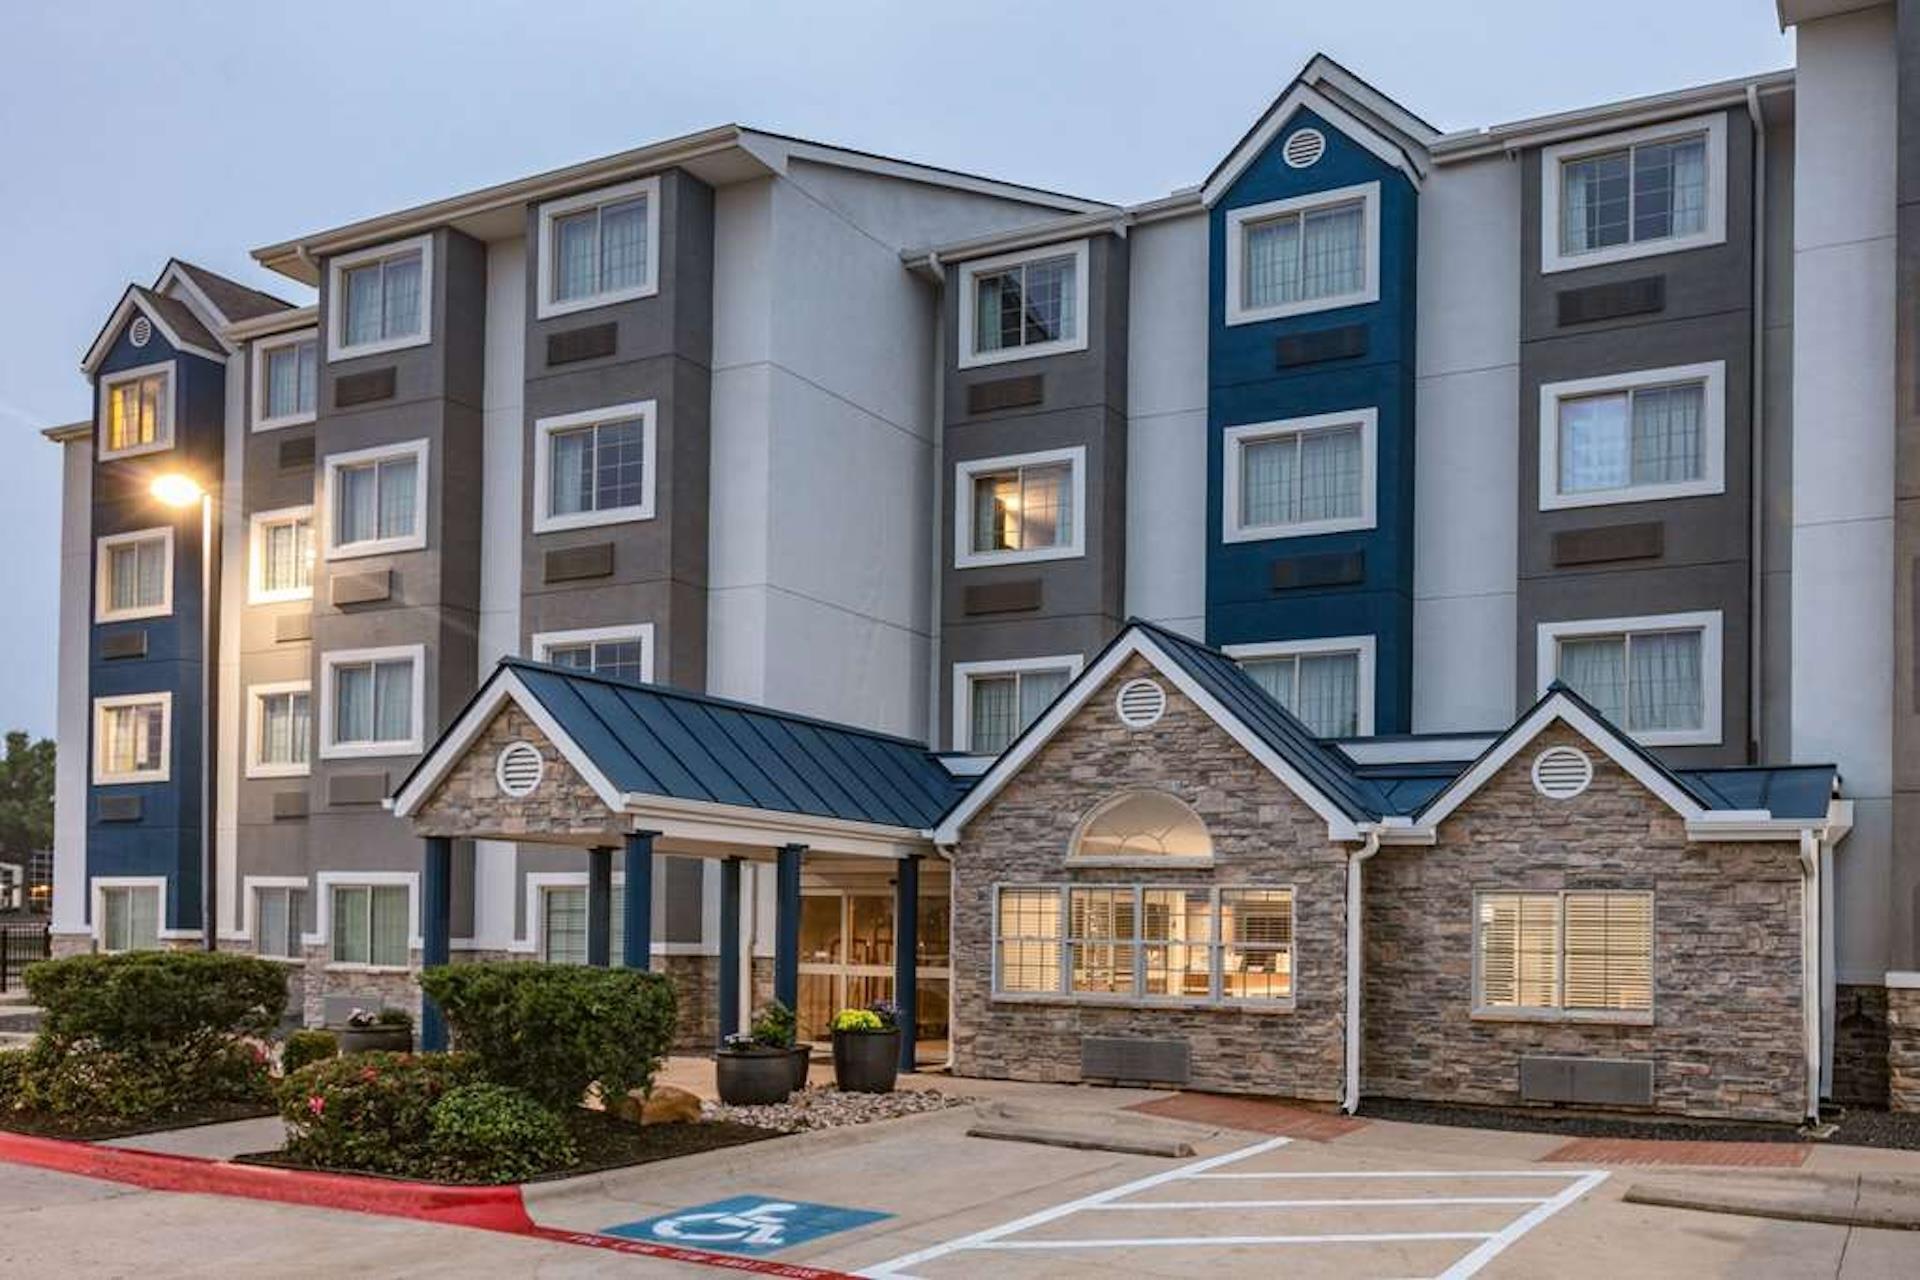 Microtel Inn and Suites by Wyndham Austin Airport in Austin, TX